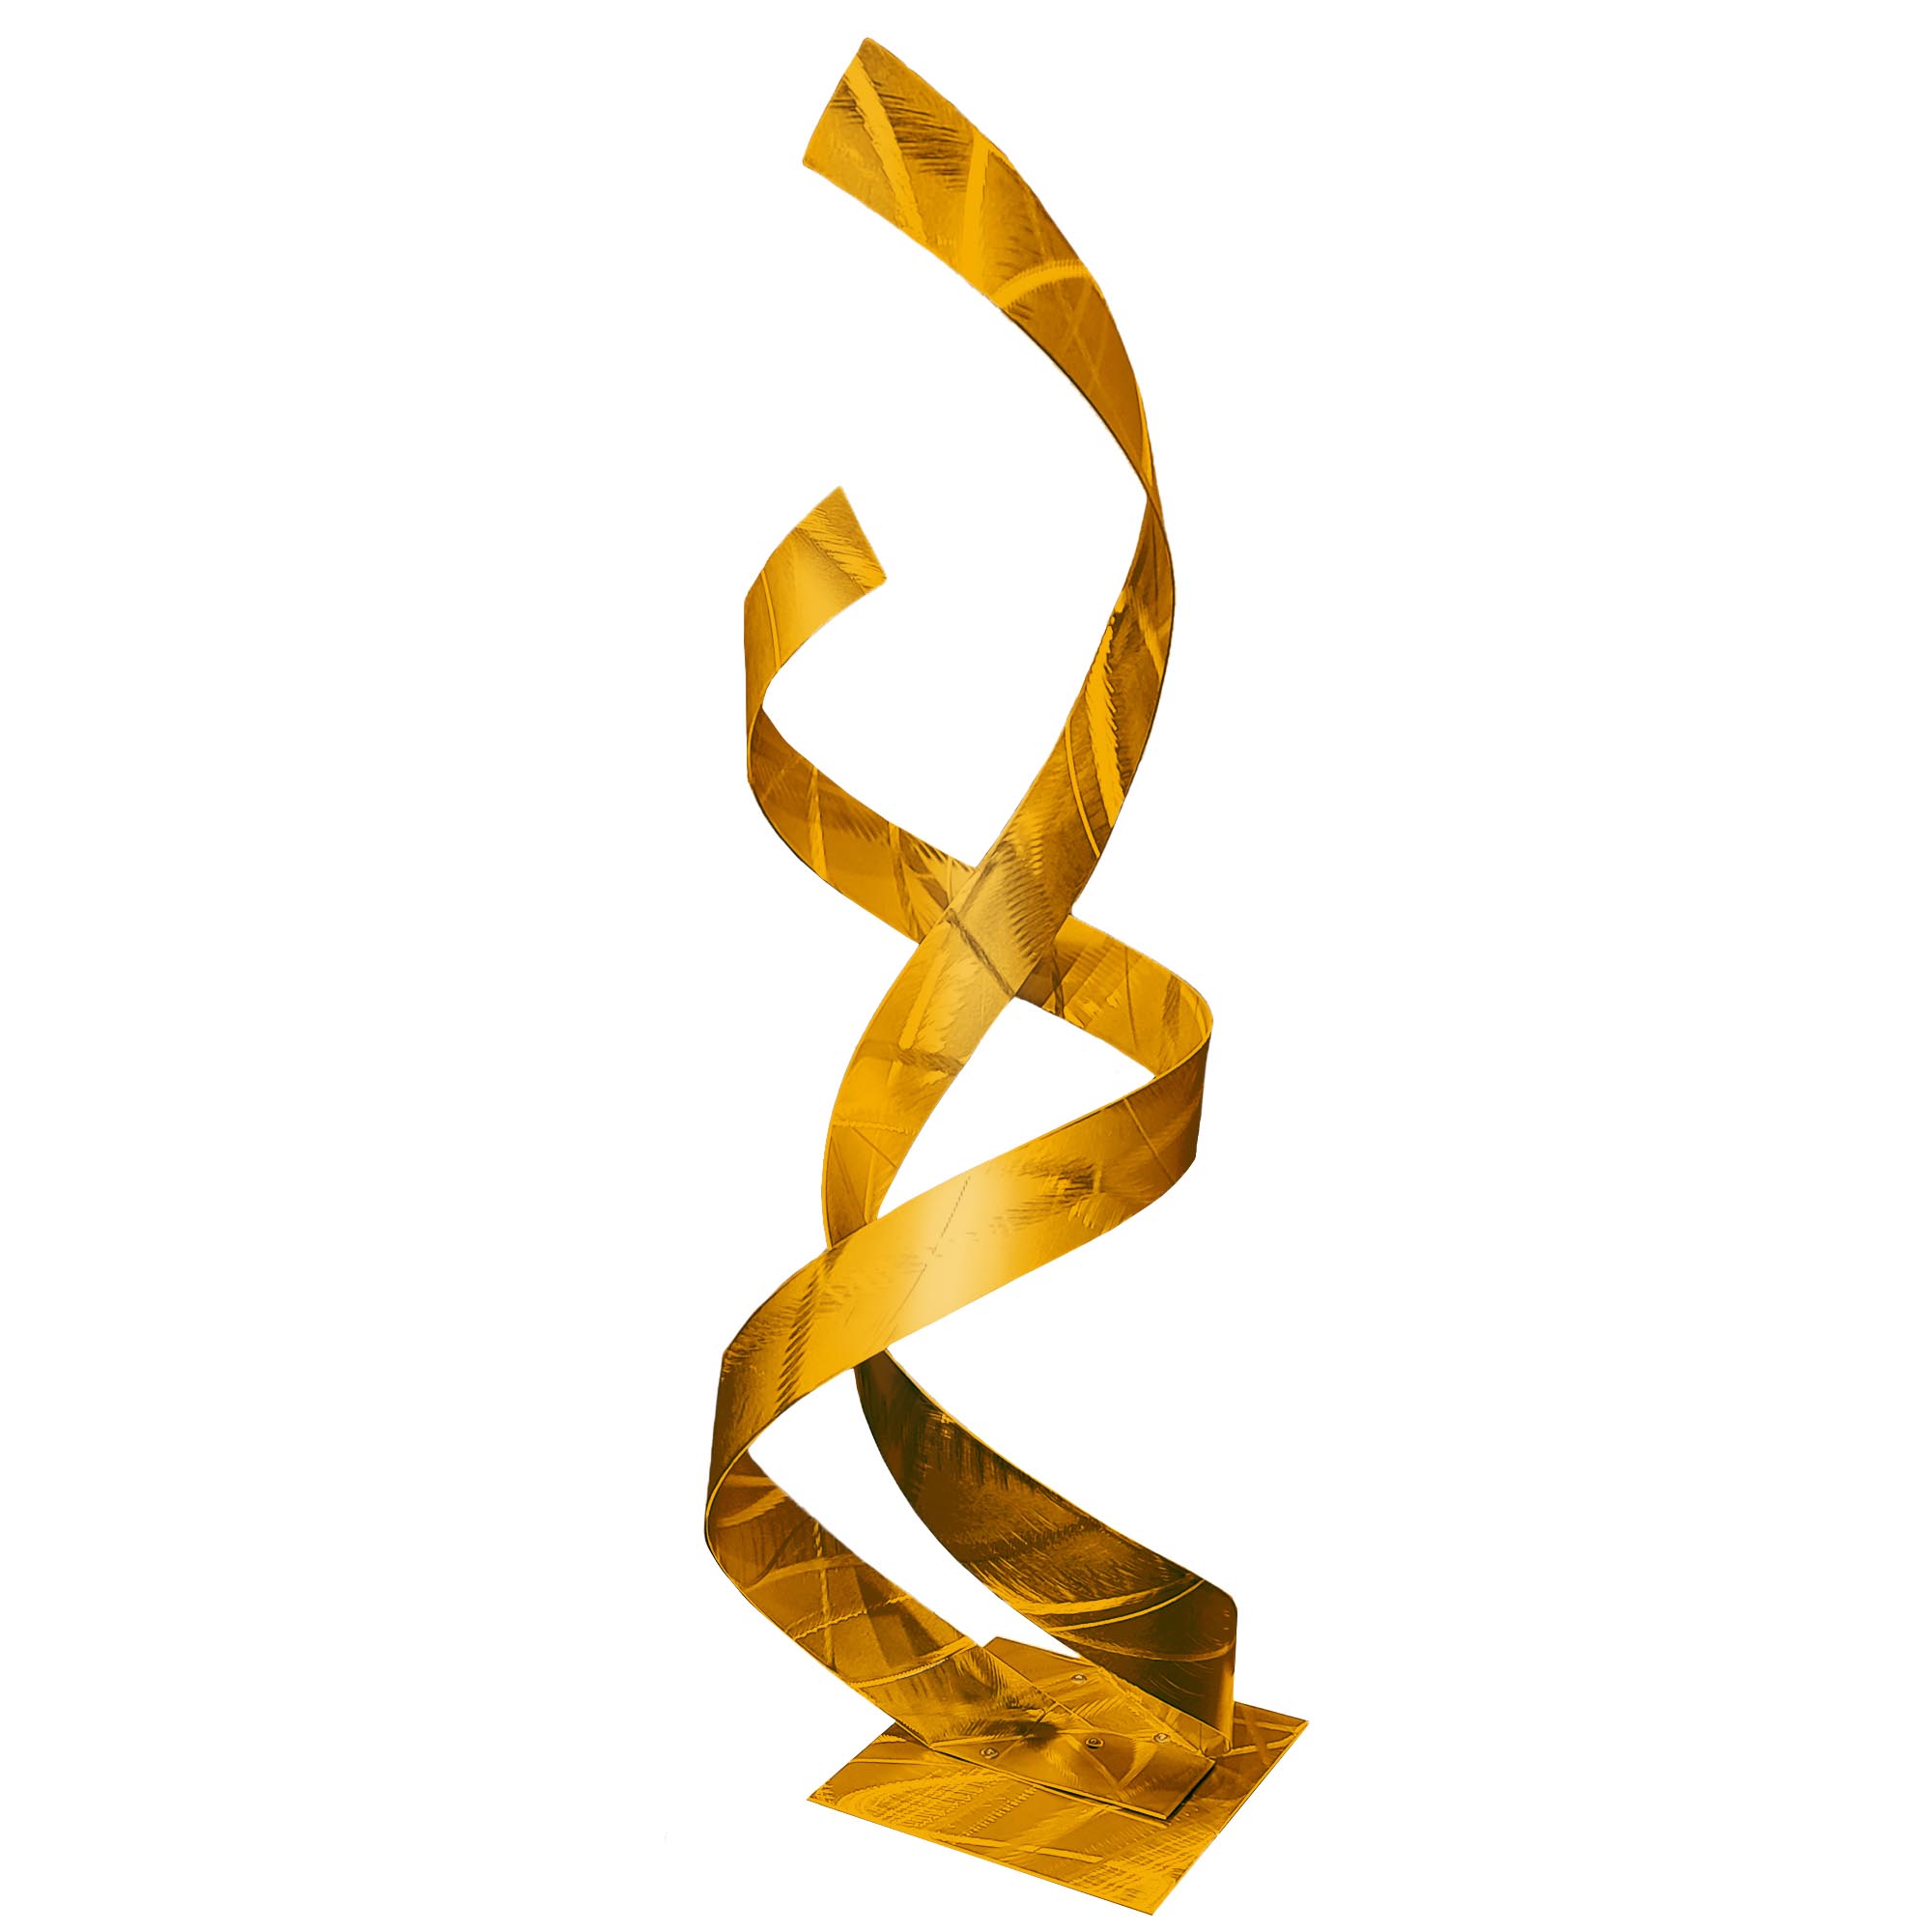 Two Lovers in Gold by Carlos Jacobs - Metal Sculpture, Modern Decor (10x33in.) - Image 2